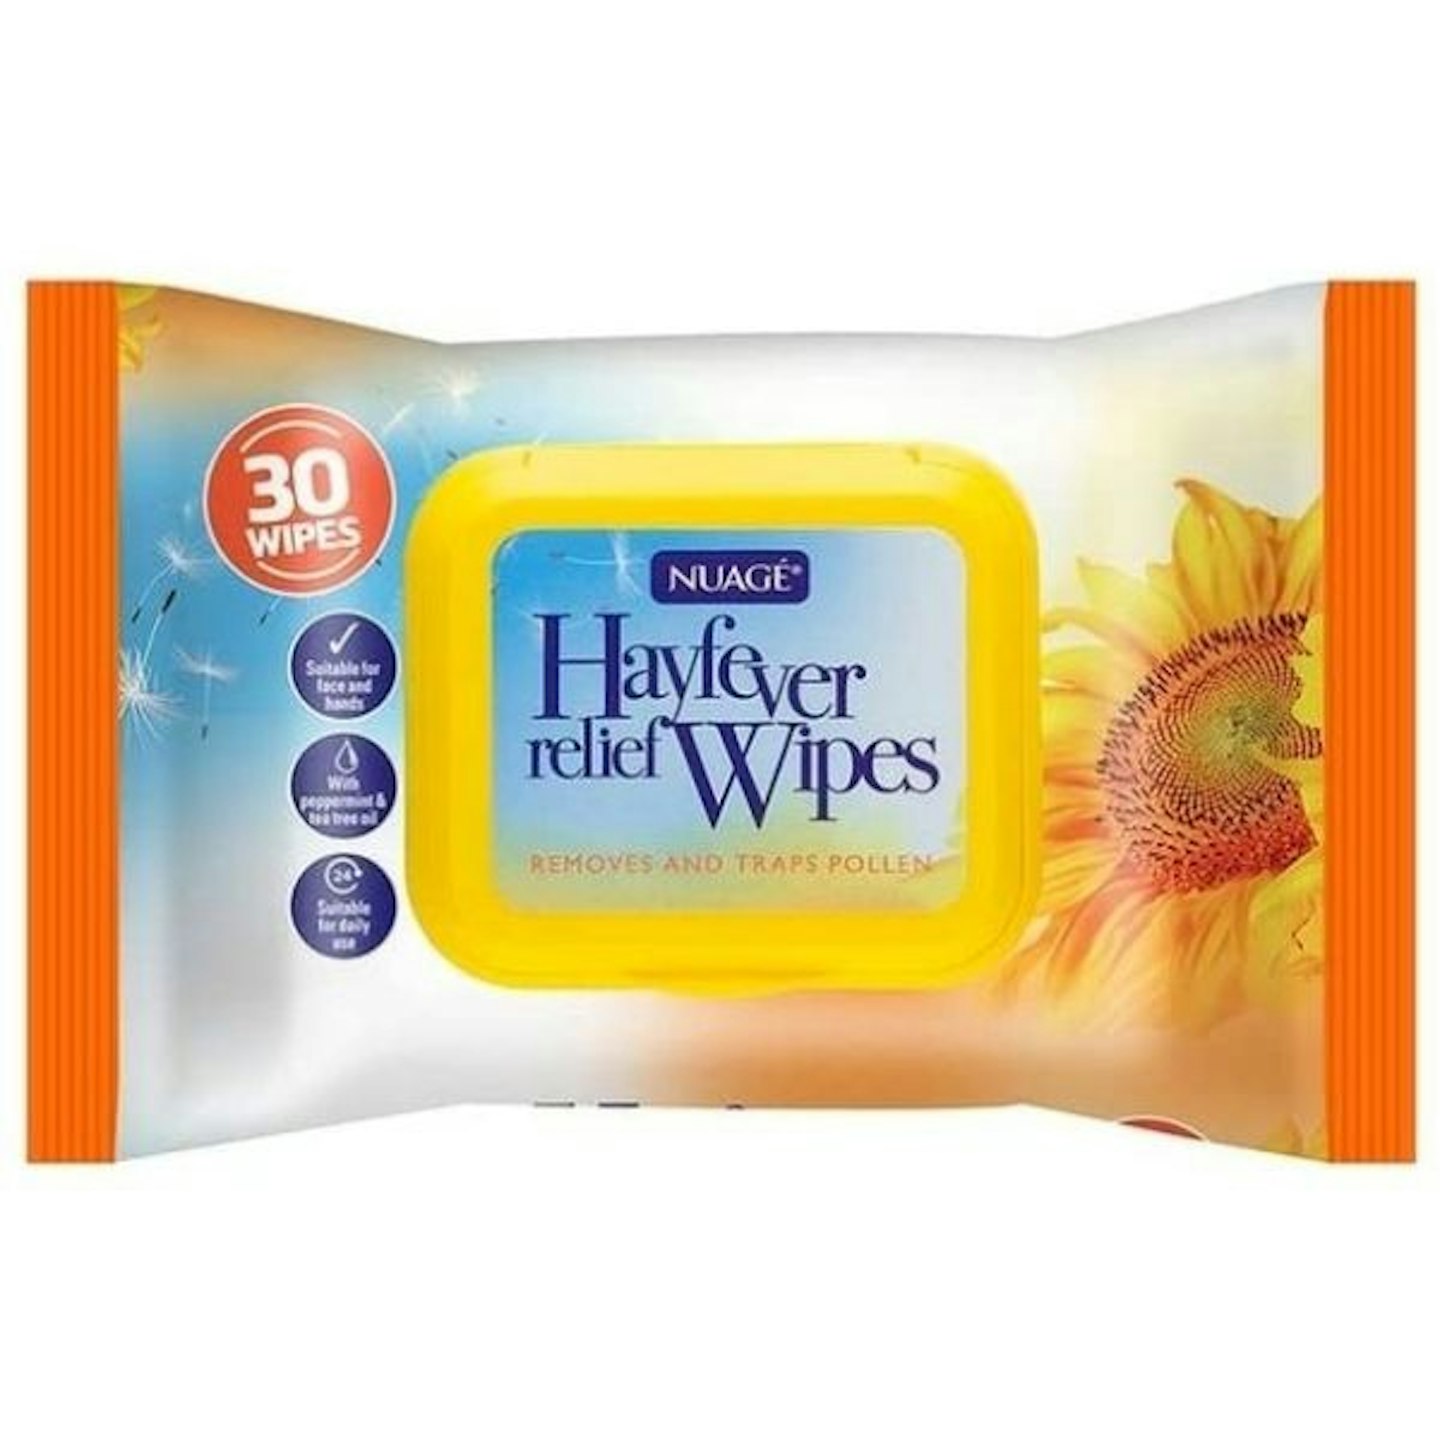 3 Pack Nuage Hayfever Allergy Relief Wipes